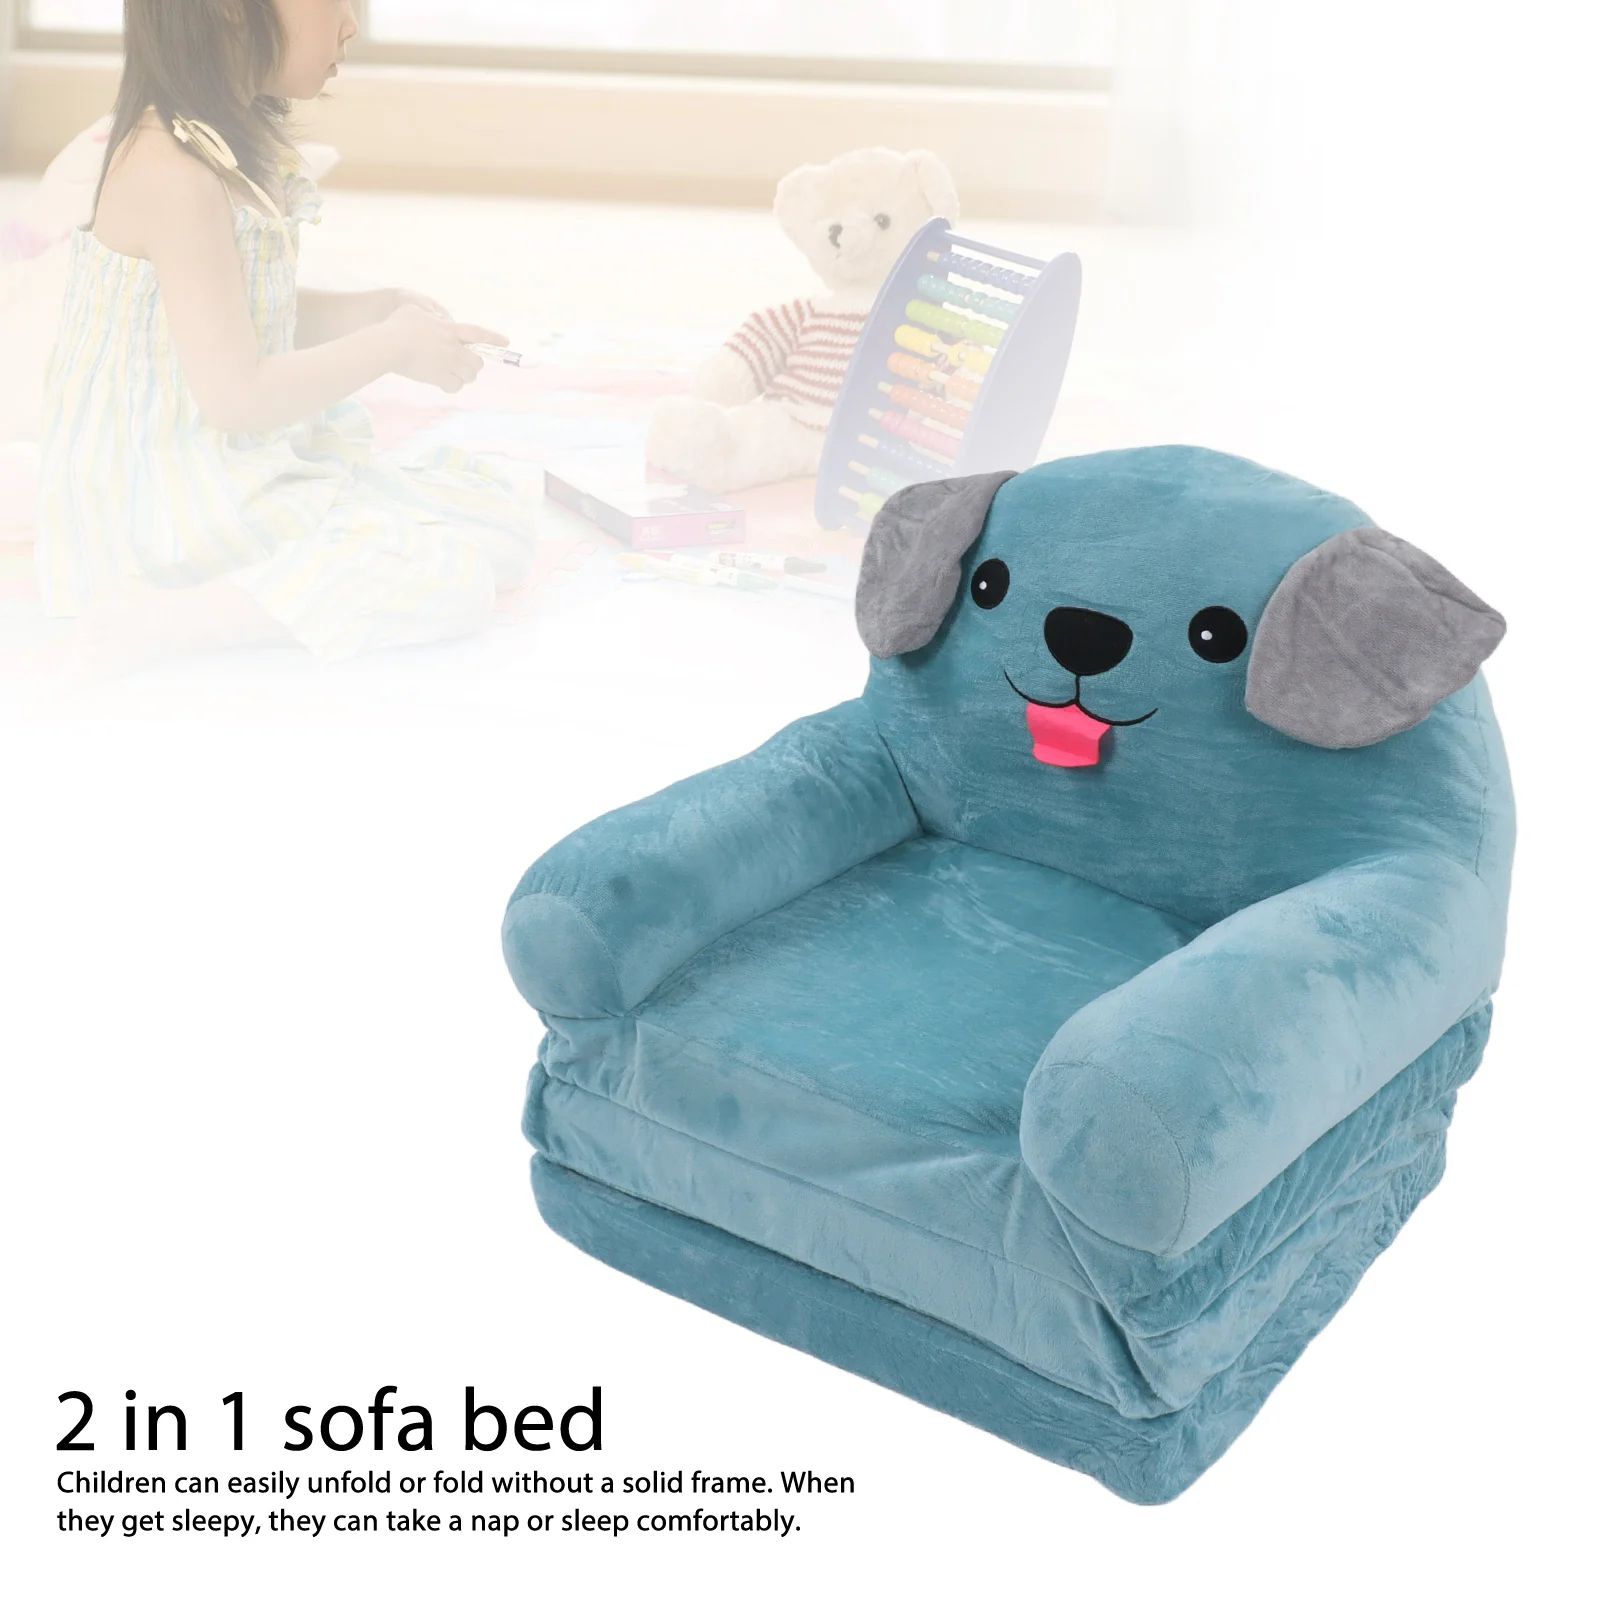 Children Sofa Blue Puppy Children'S Sofa Cute Cartoon Folding Small Sofa Bed  Dual Use Child Bean Bag For Kids – Aliexpress Intended For 2 In 1 Foldable Children'S Sofa Beds (Photo 8 of 15)